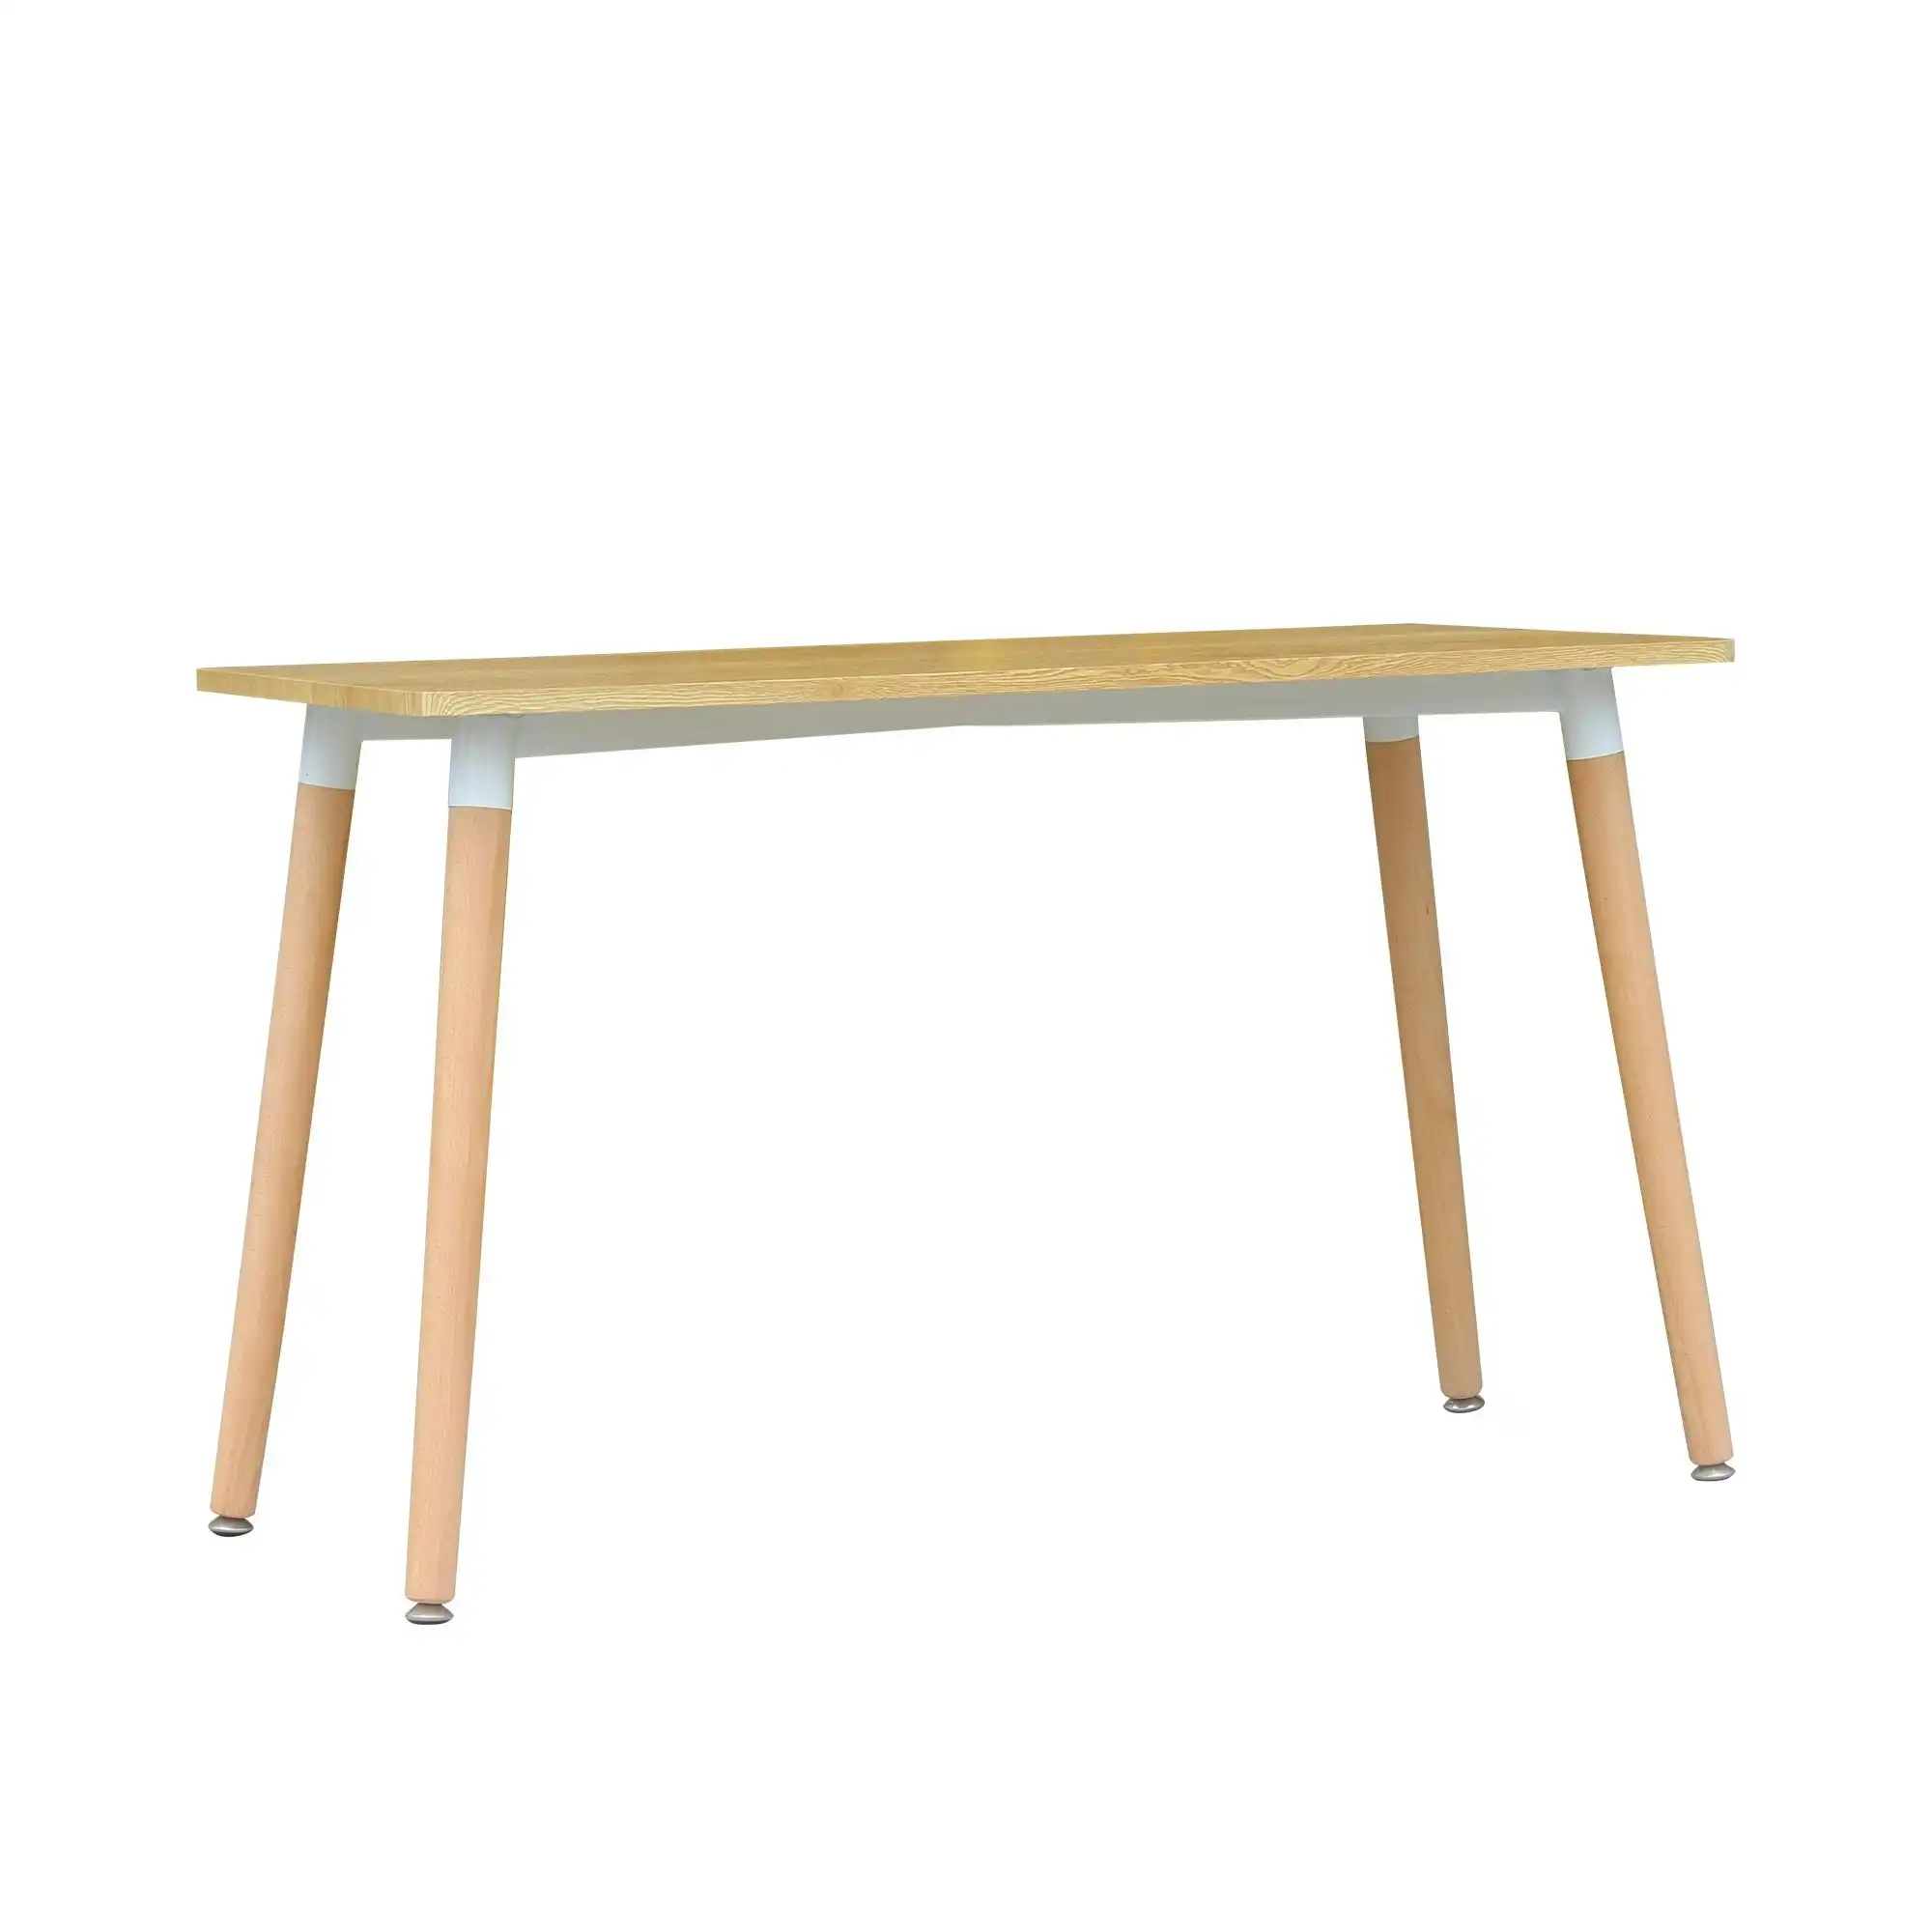 Chotto - Hako Rectangle Top Dining Table with Wooden Legs - Wood - 120cm